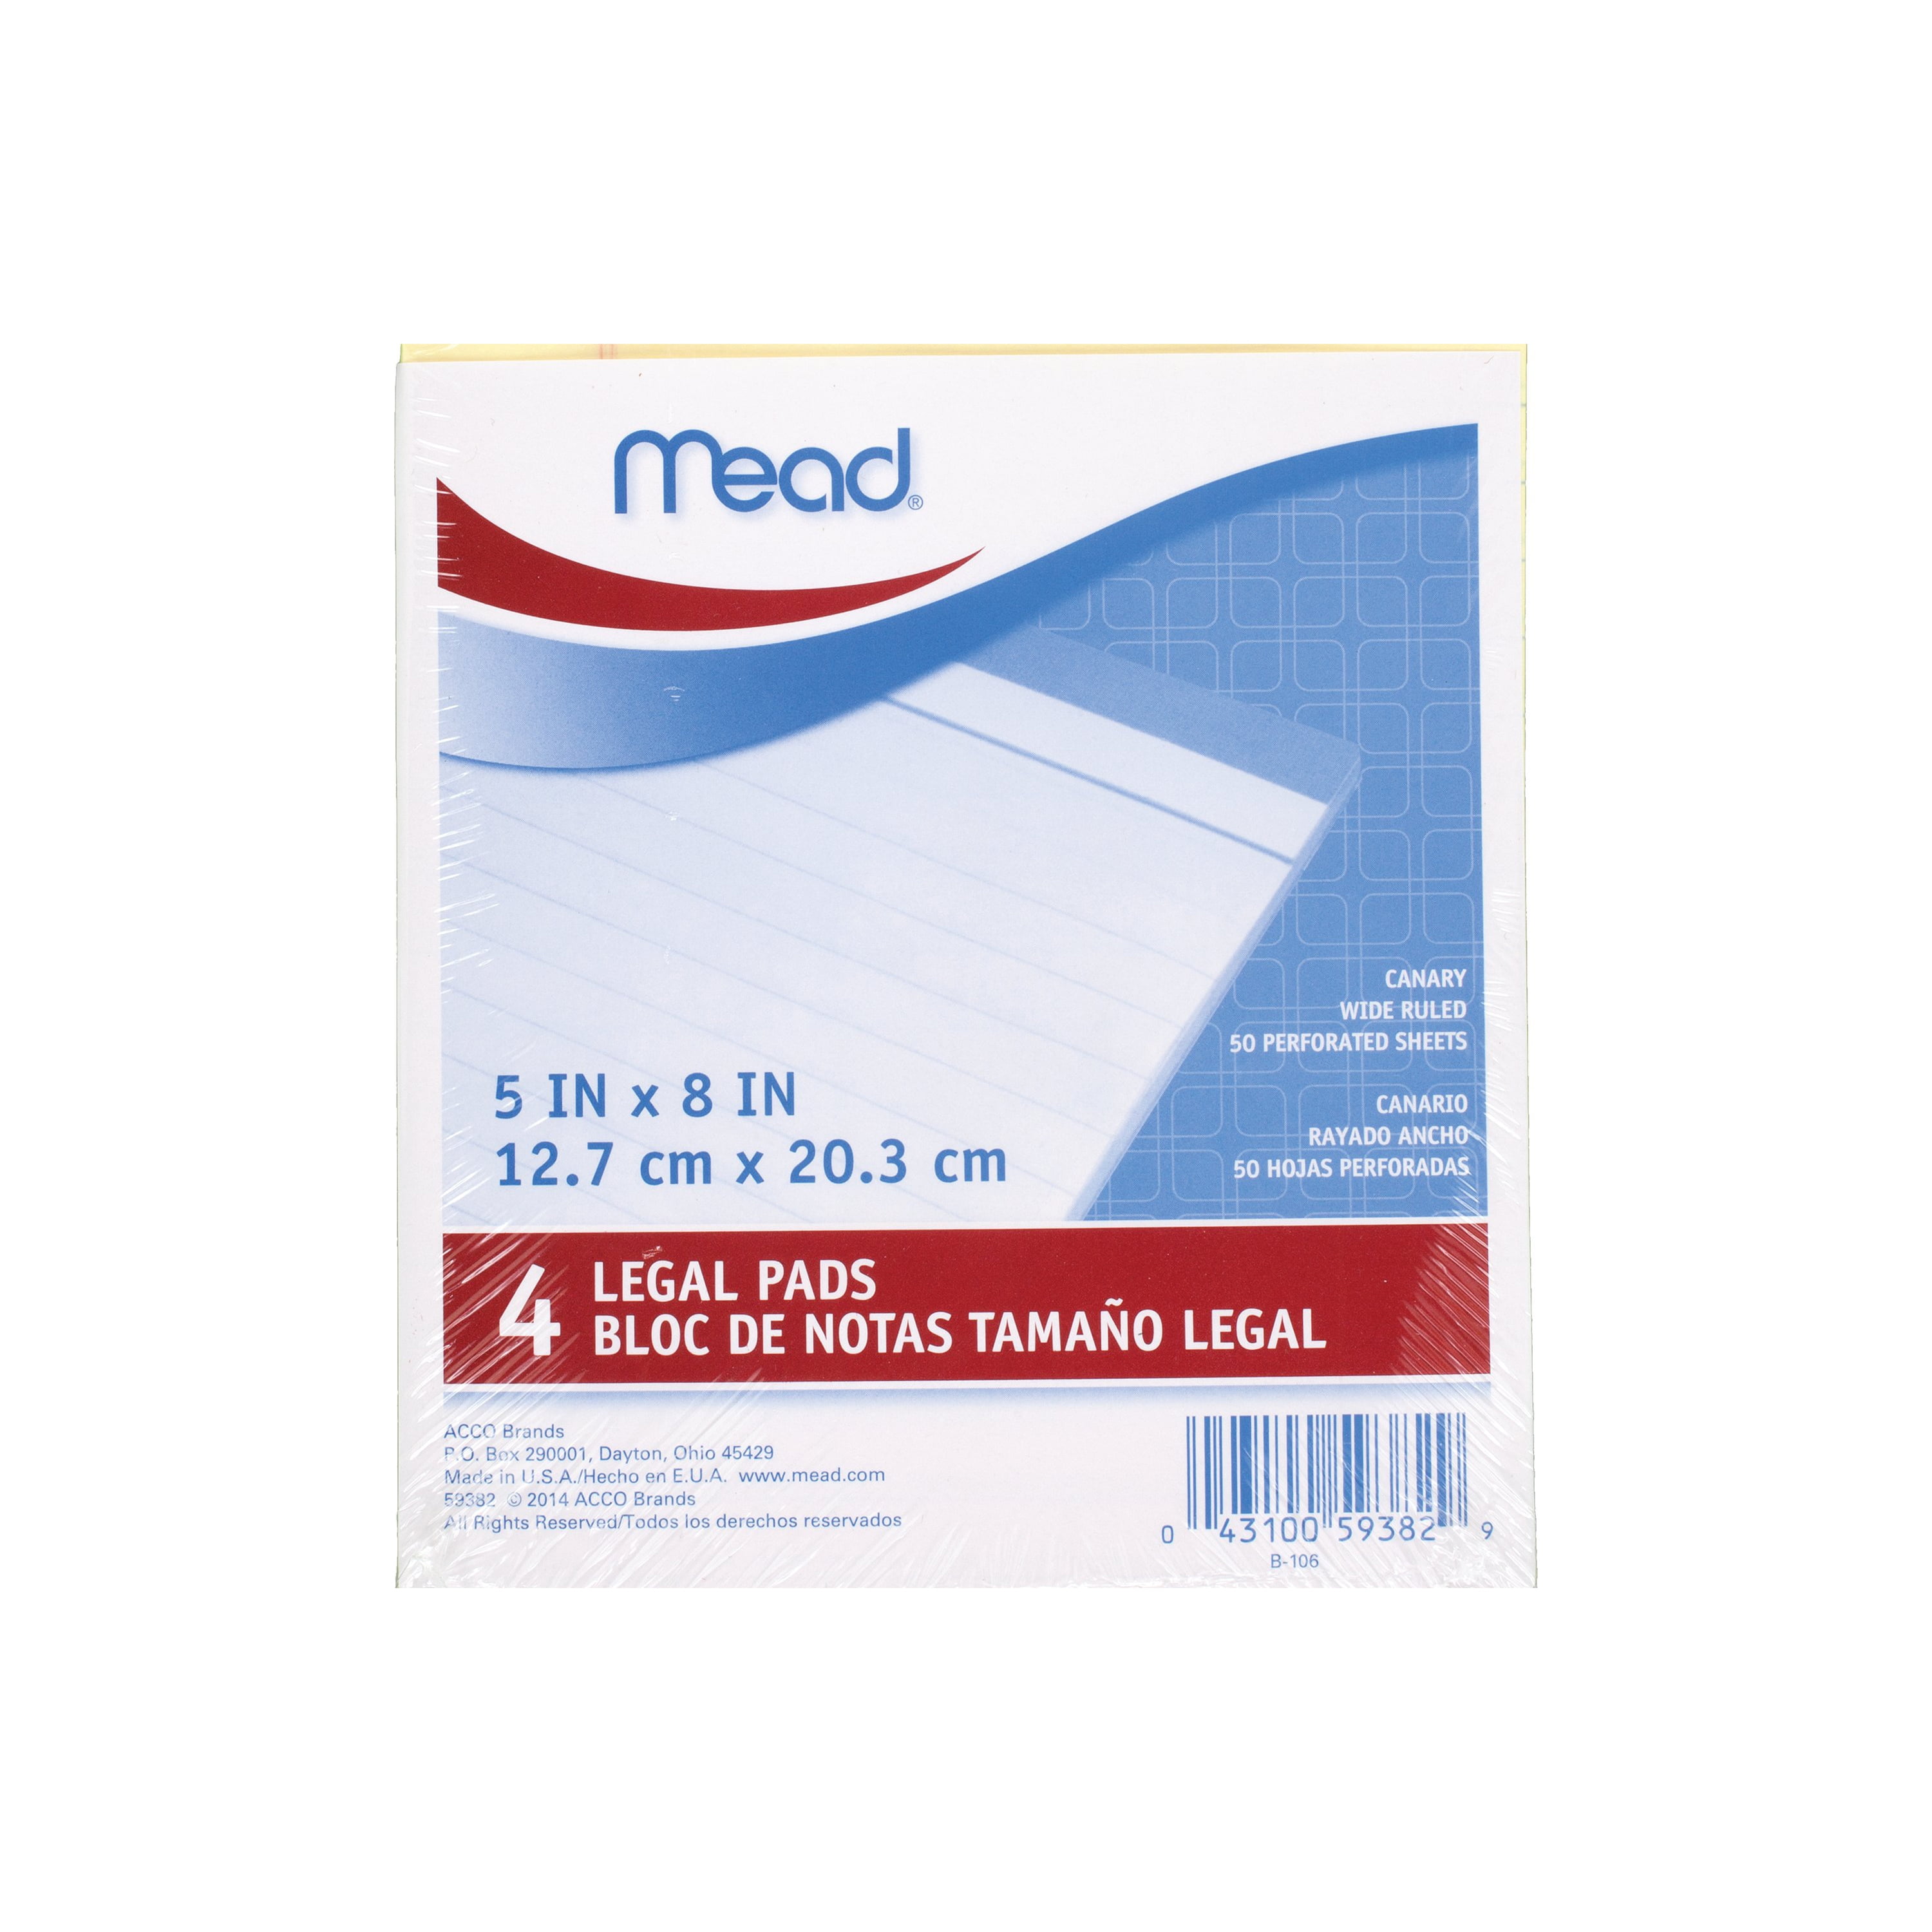 Mead Junior Legal Paper Pad, 5" x 8", Canary Yellow, 4 Pack (59382) -